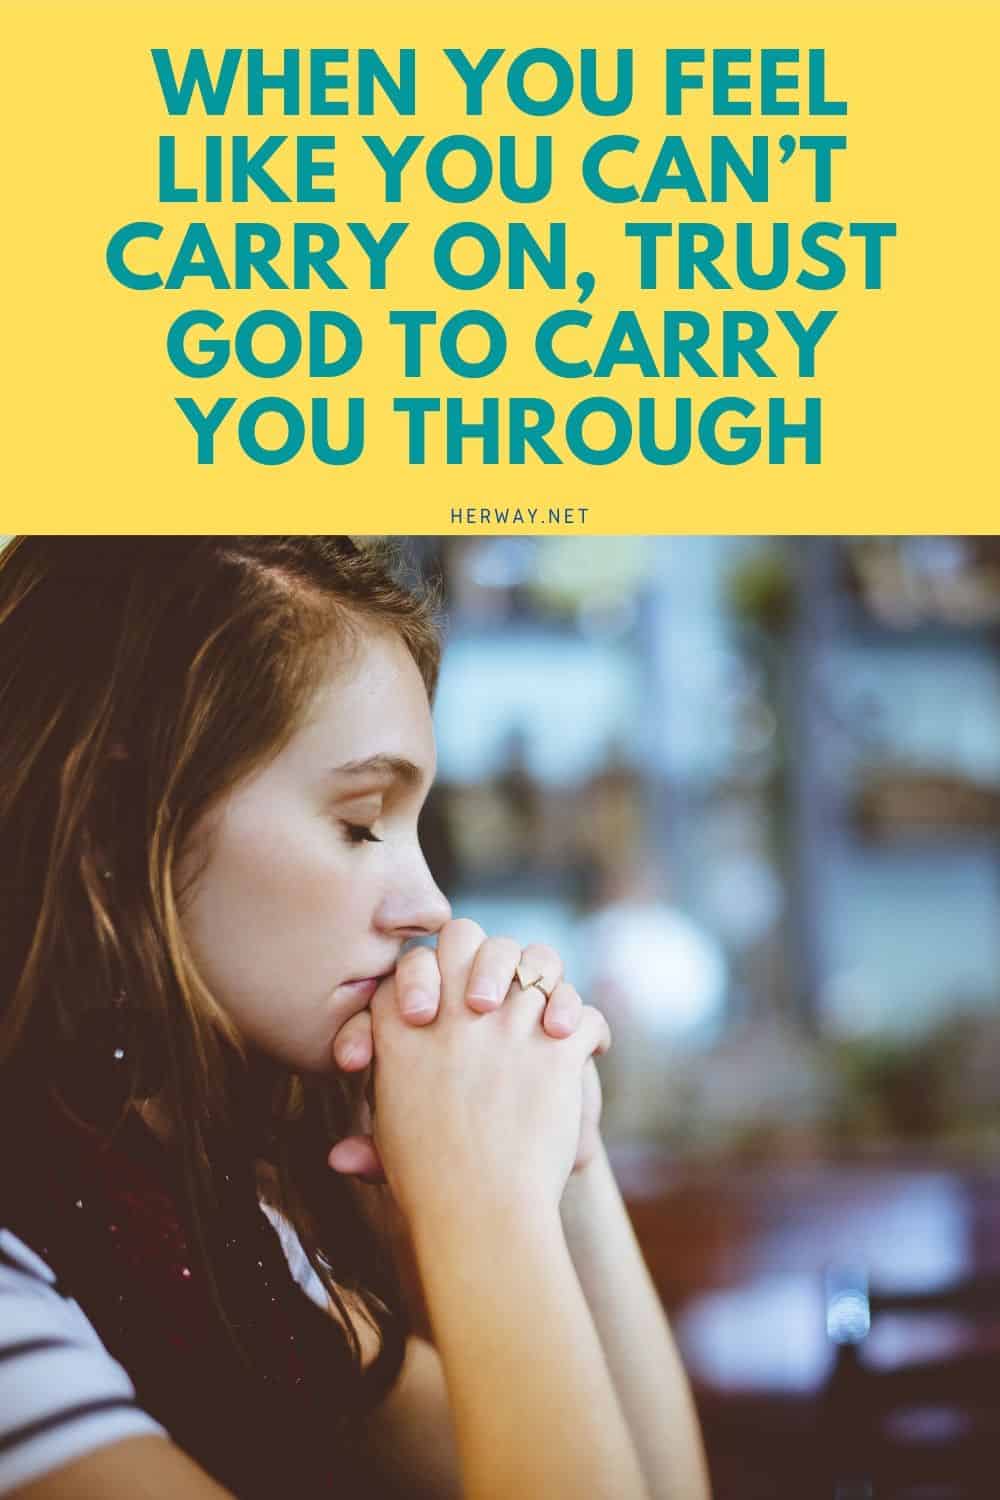 When You Feel Like You Can’t Carry On, Trust God To Carry You Through